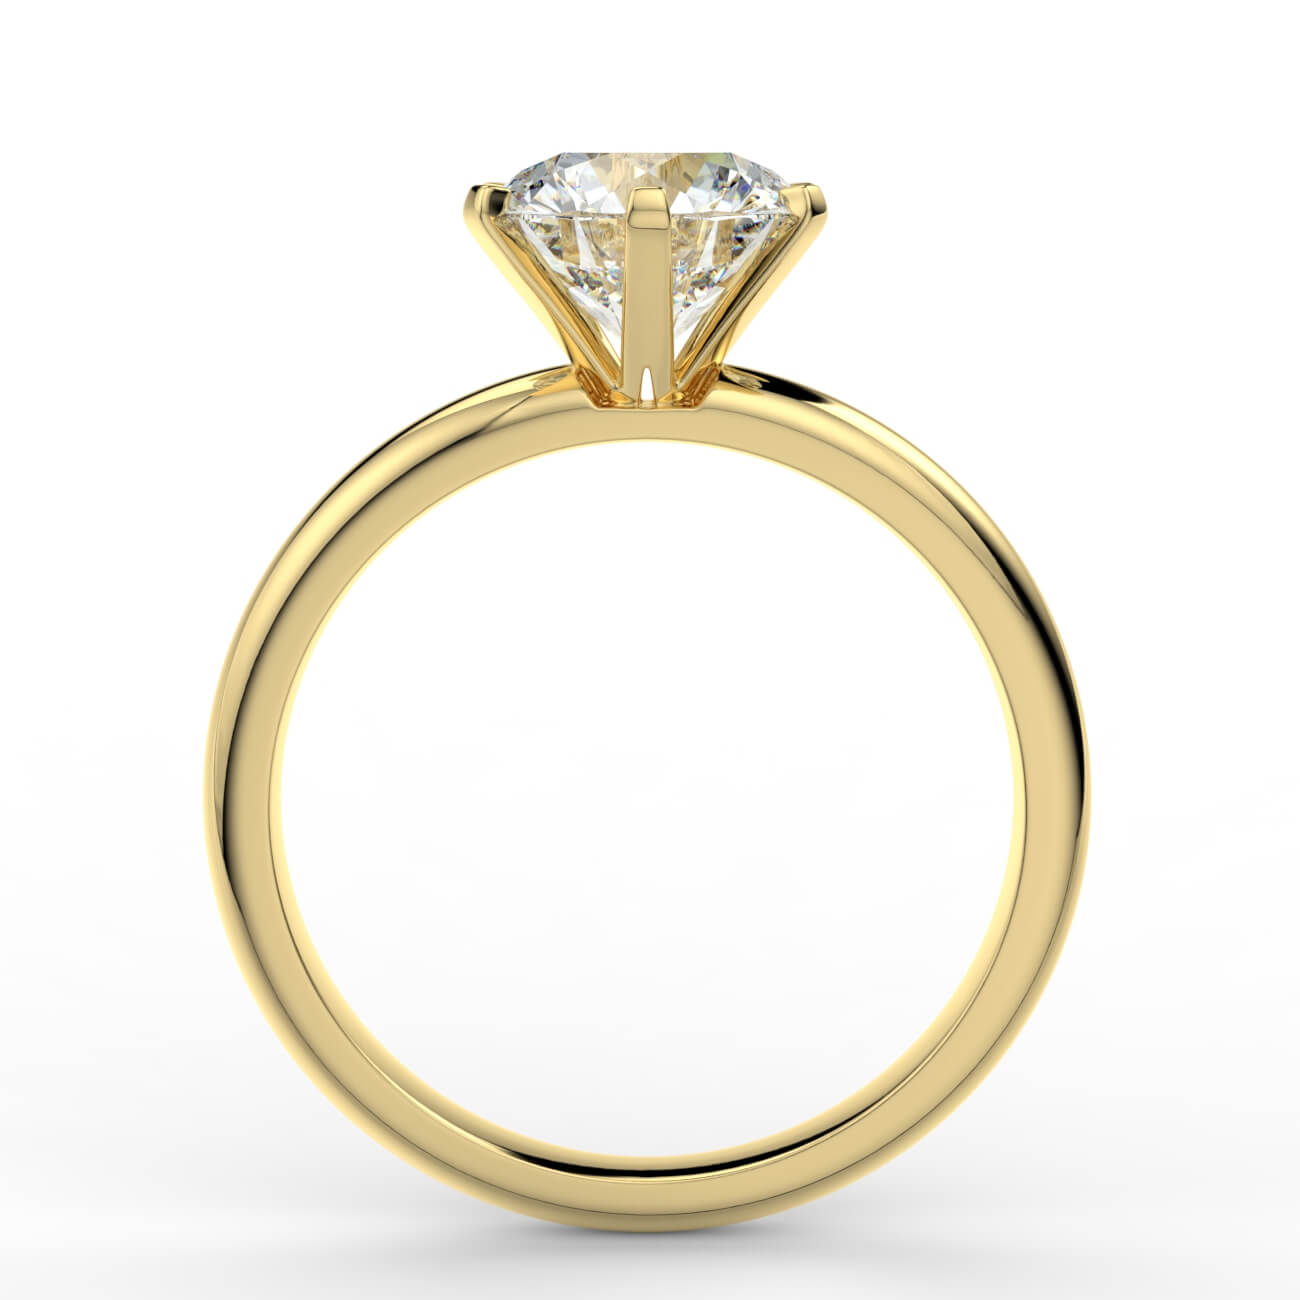 Comfort fit 6 claw solitaire diamond ring in yellow gold – Australian Diamond Network